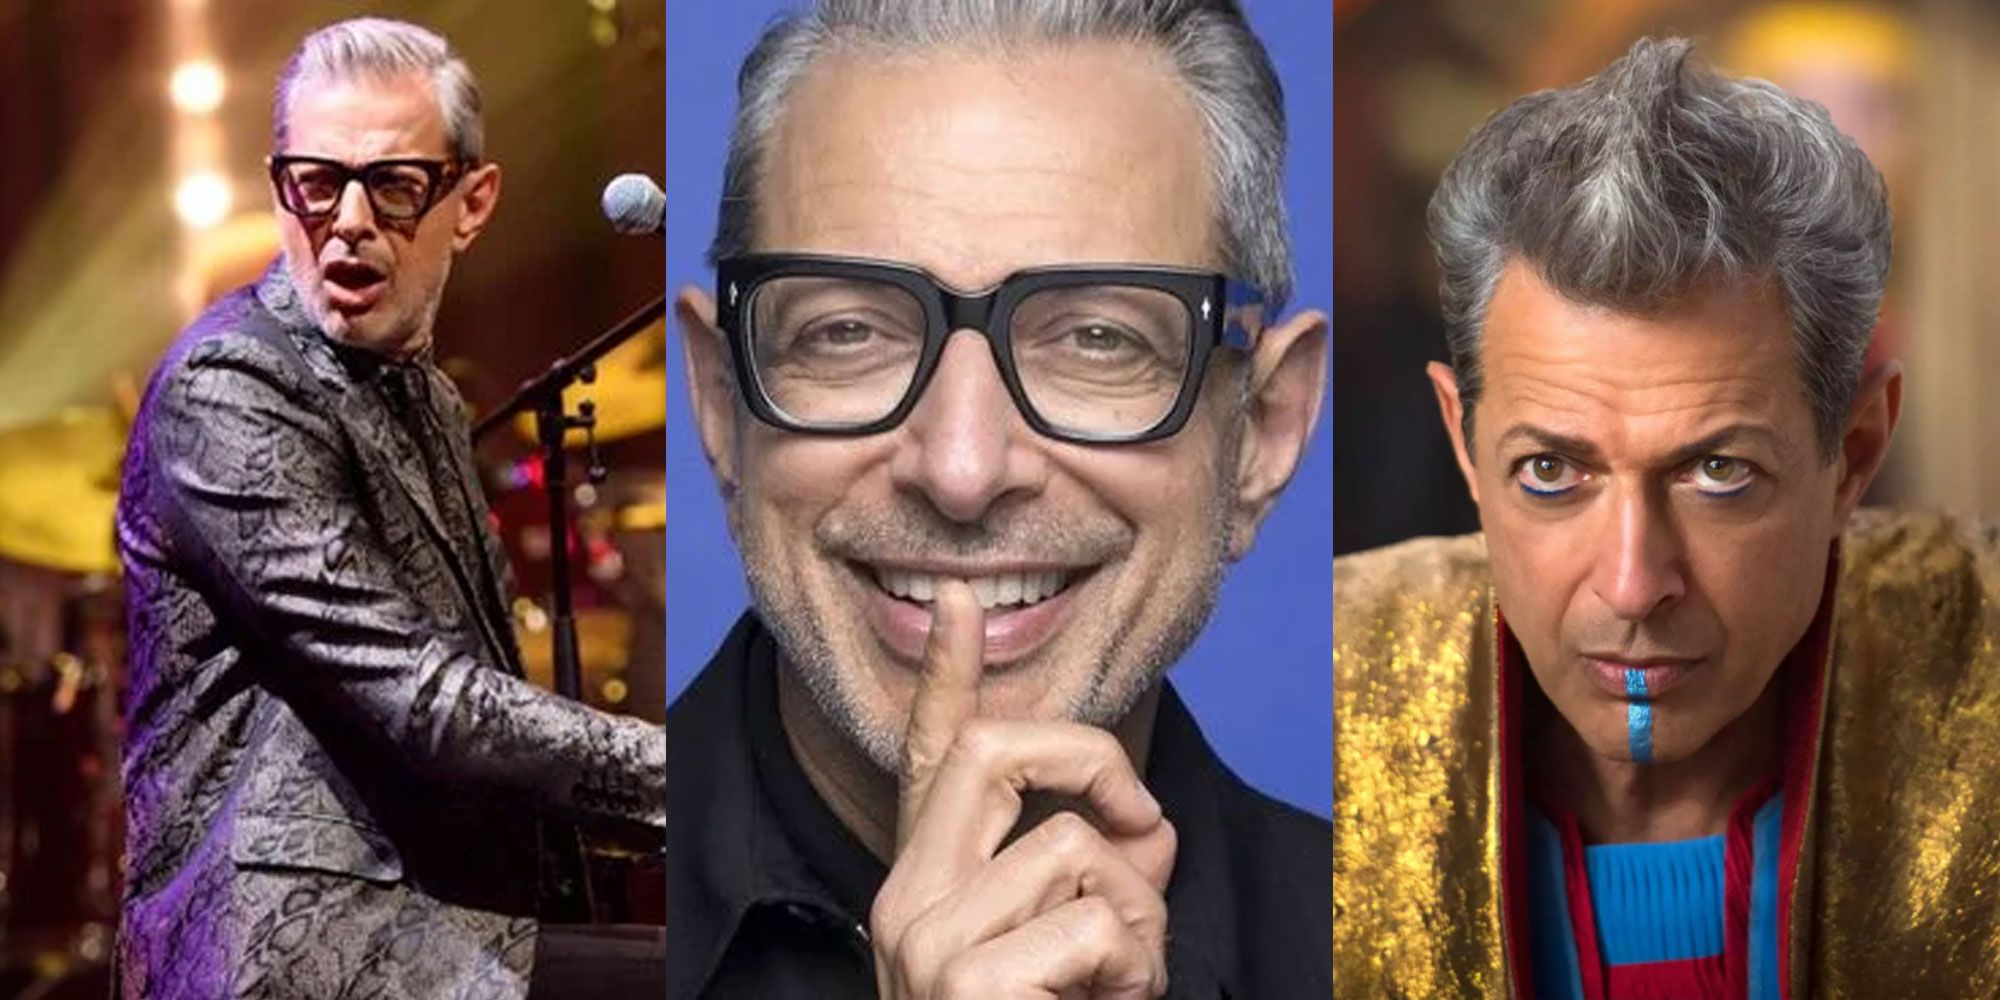 A split image features Jeff Goldblum playing the piano, smiling, and appearing in Thor: Ragnarok